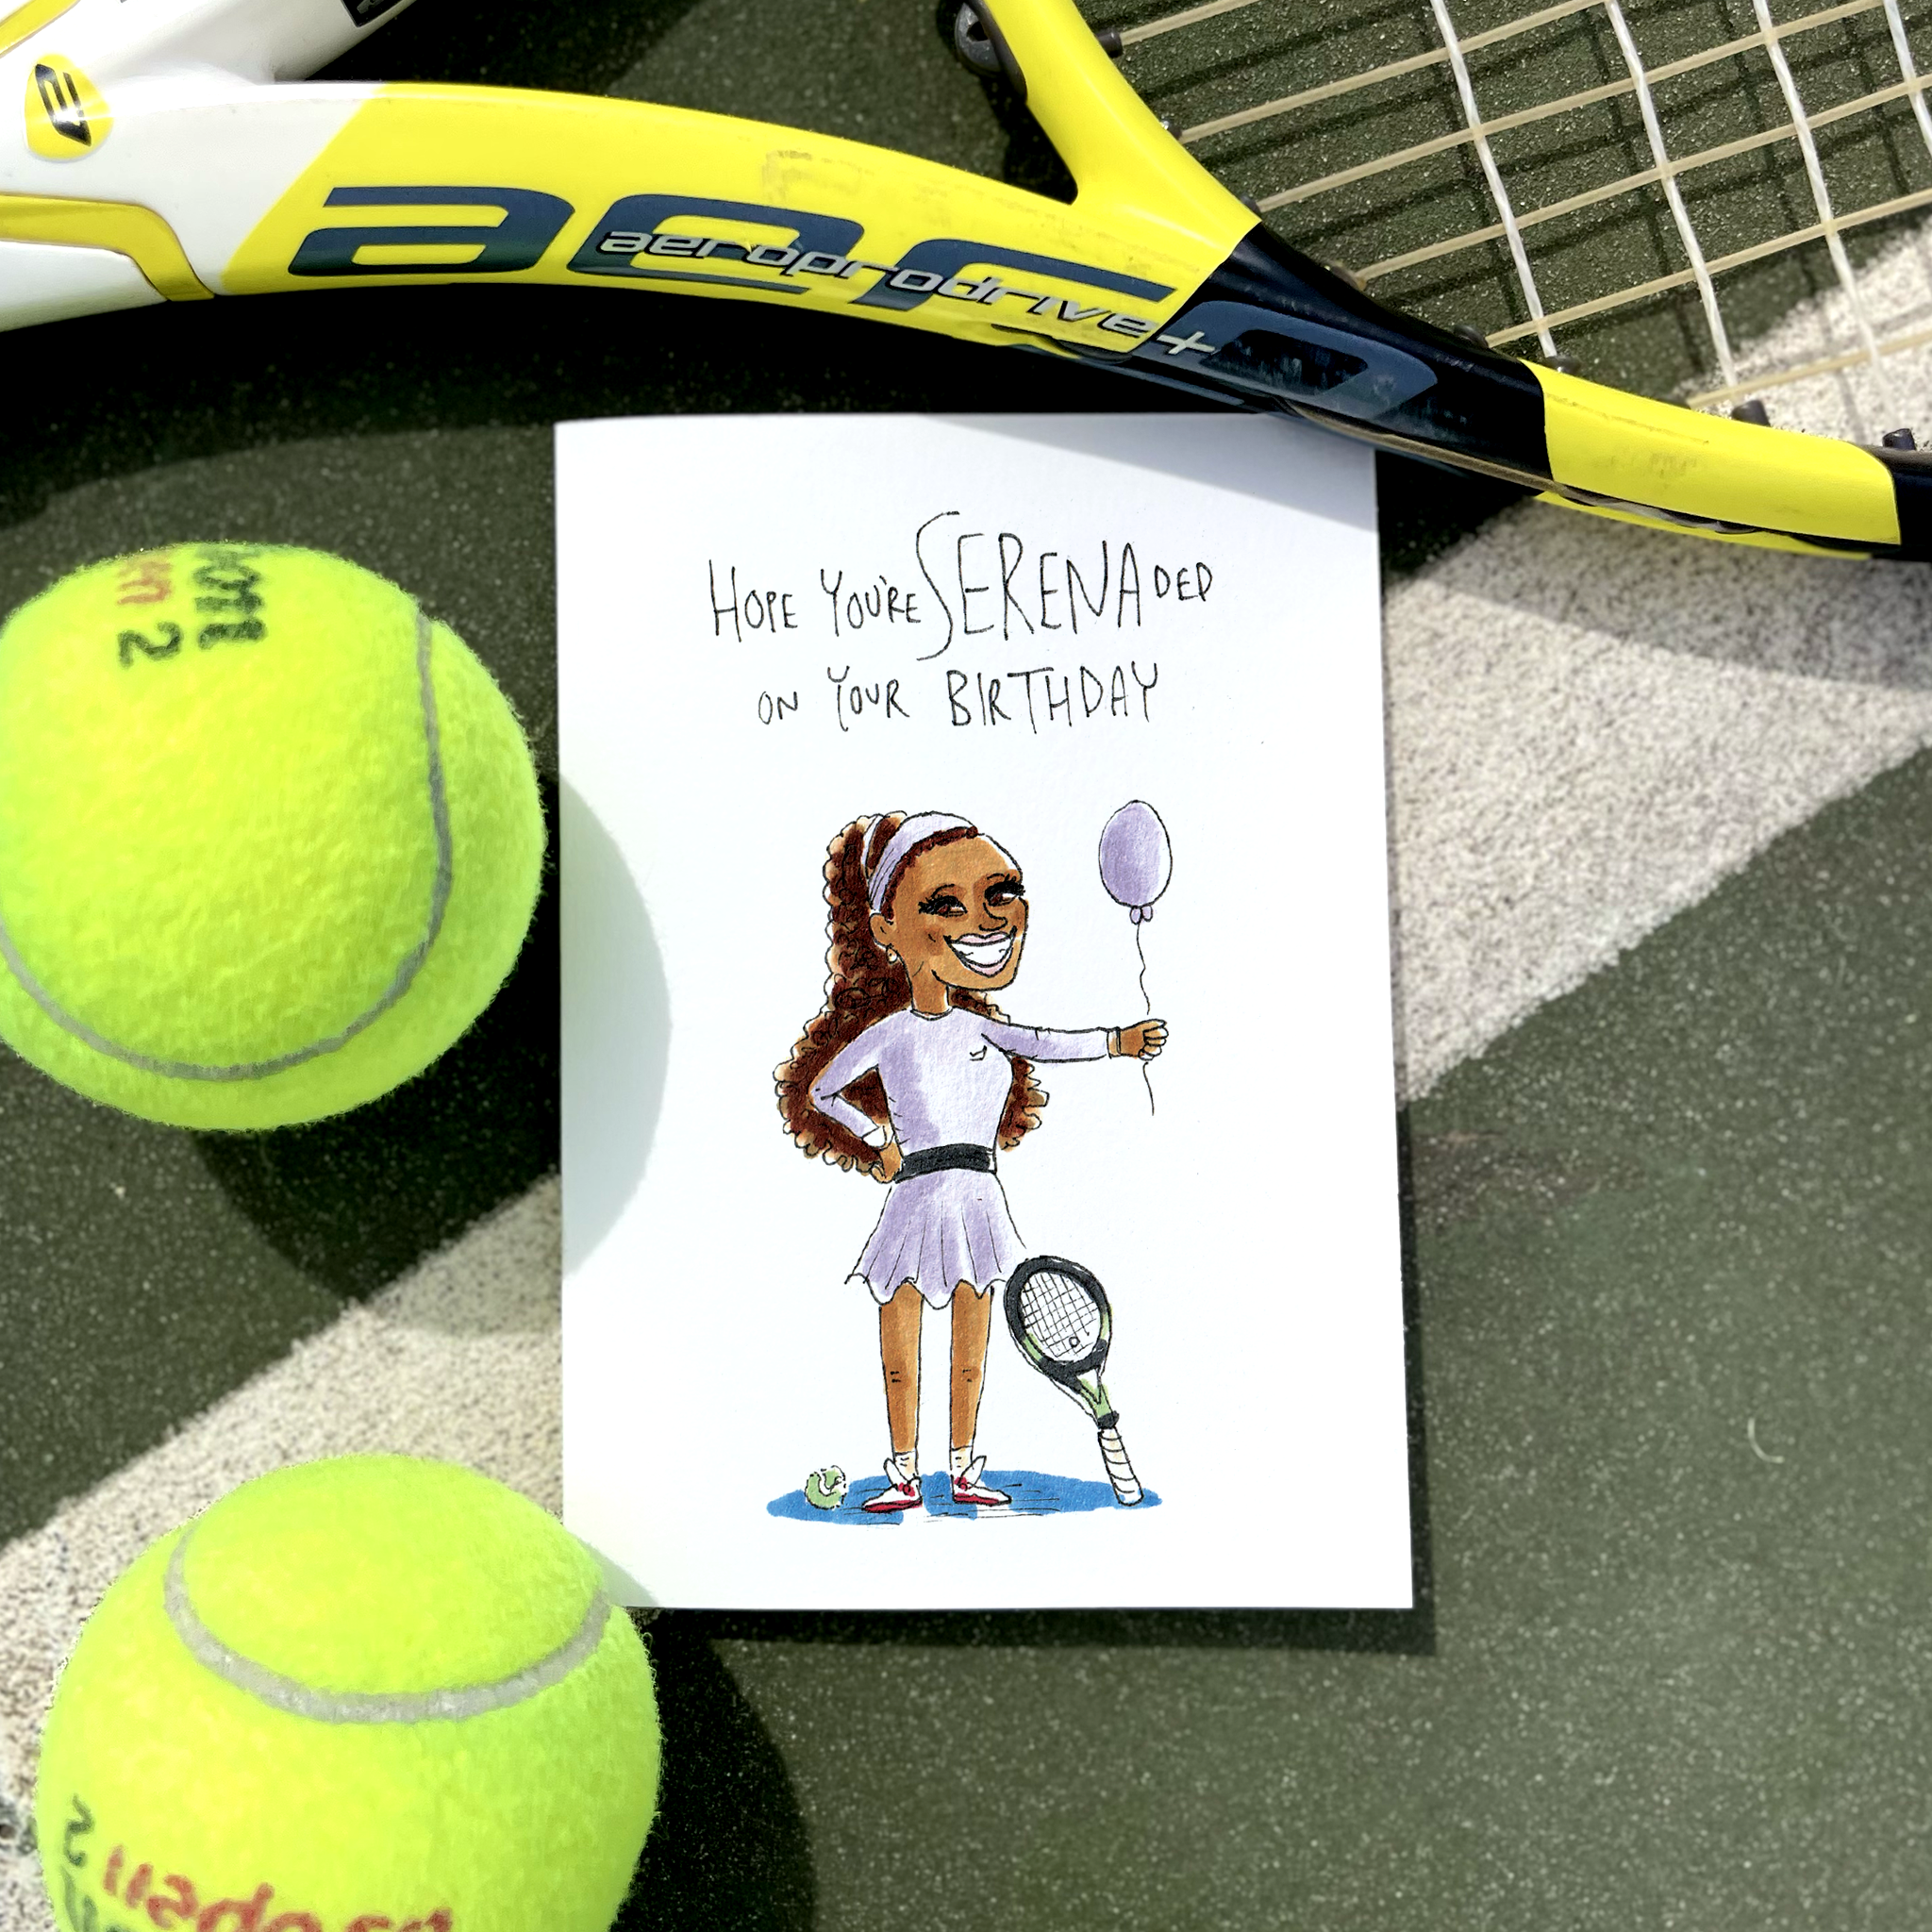 Hope You're Serenaded On Your Birthday - TENNIS FANS collection